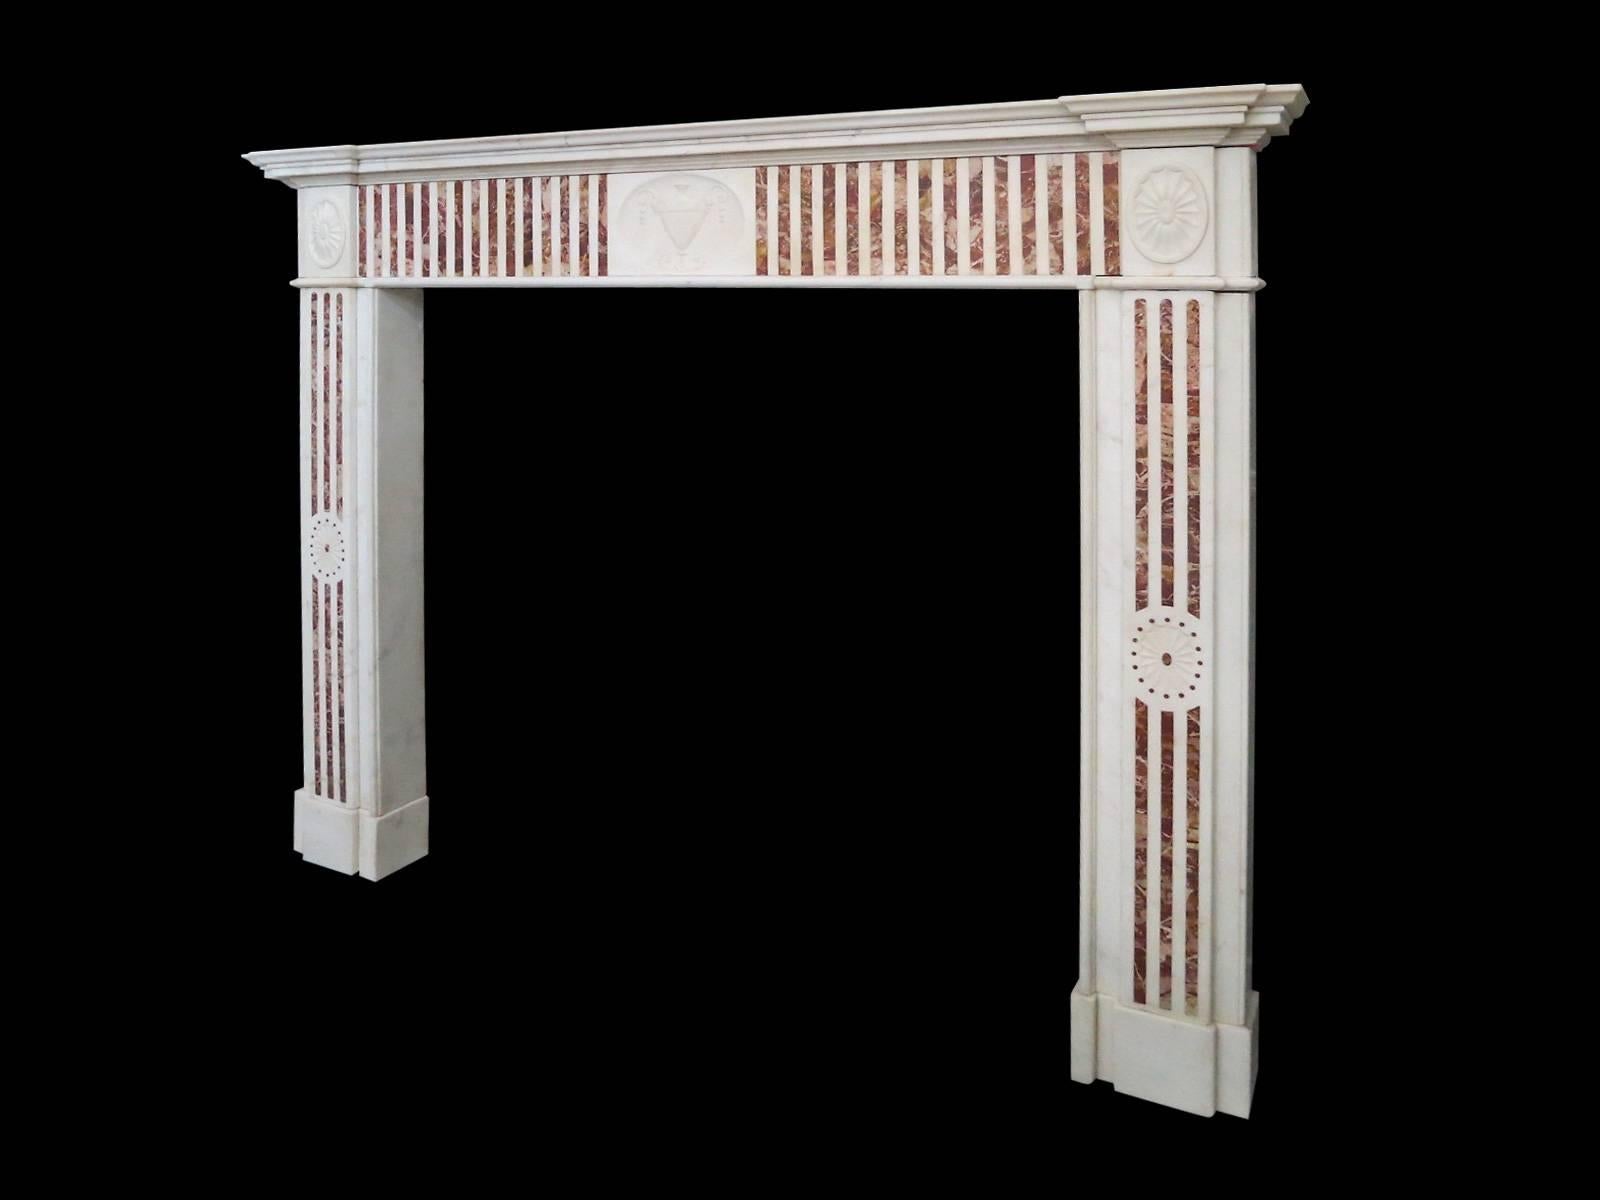 An Irish, George III period surround in Statuary white and Sicilian Jasper Marbles. 
The pilaster fluted jambs with Jasper inlay and carved elliptical rosettes. The centre tablet of carved classical urn flanked either side by conforming Jasper